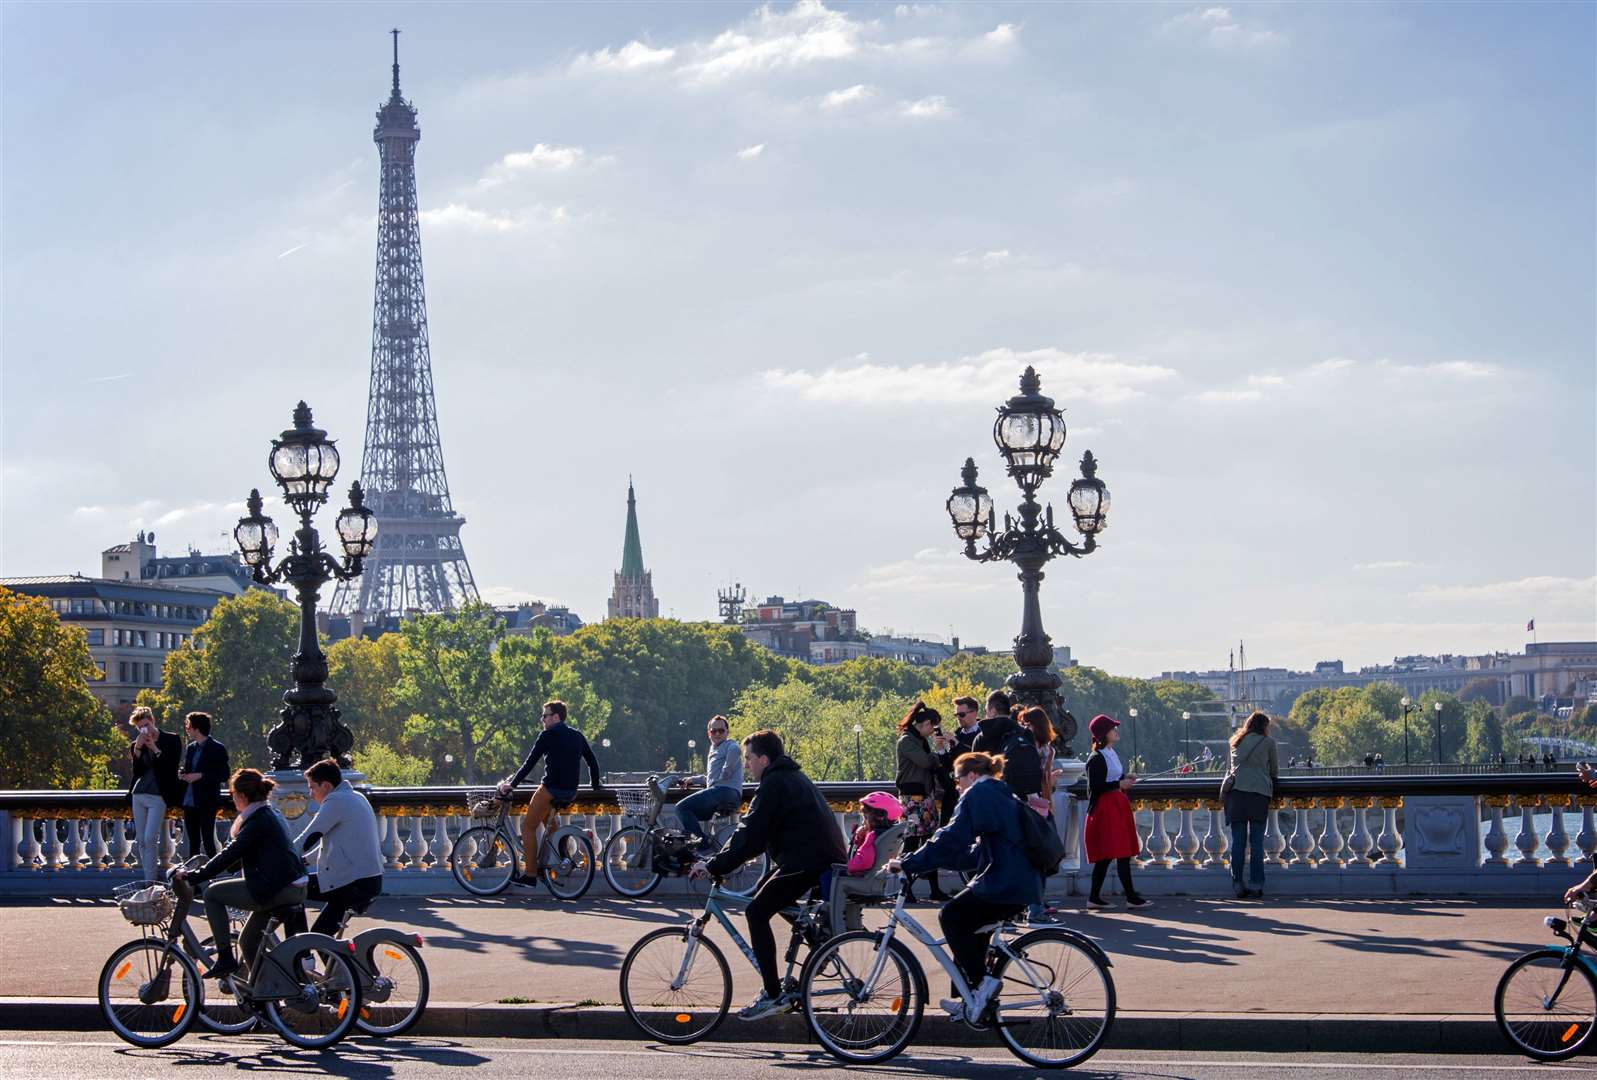 Team GB will be headed for Paris for next year’s Olympic Games. Image: iStock.